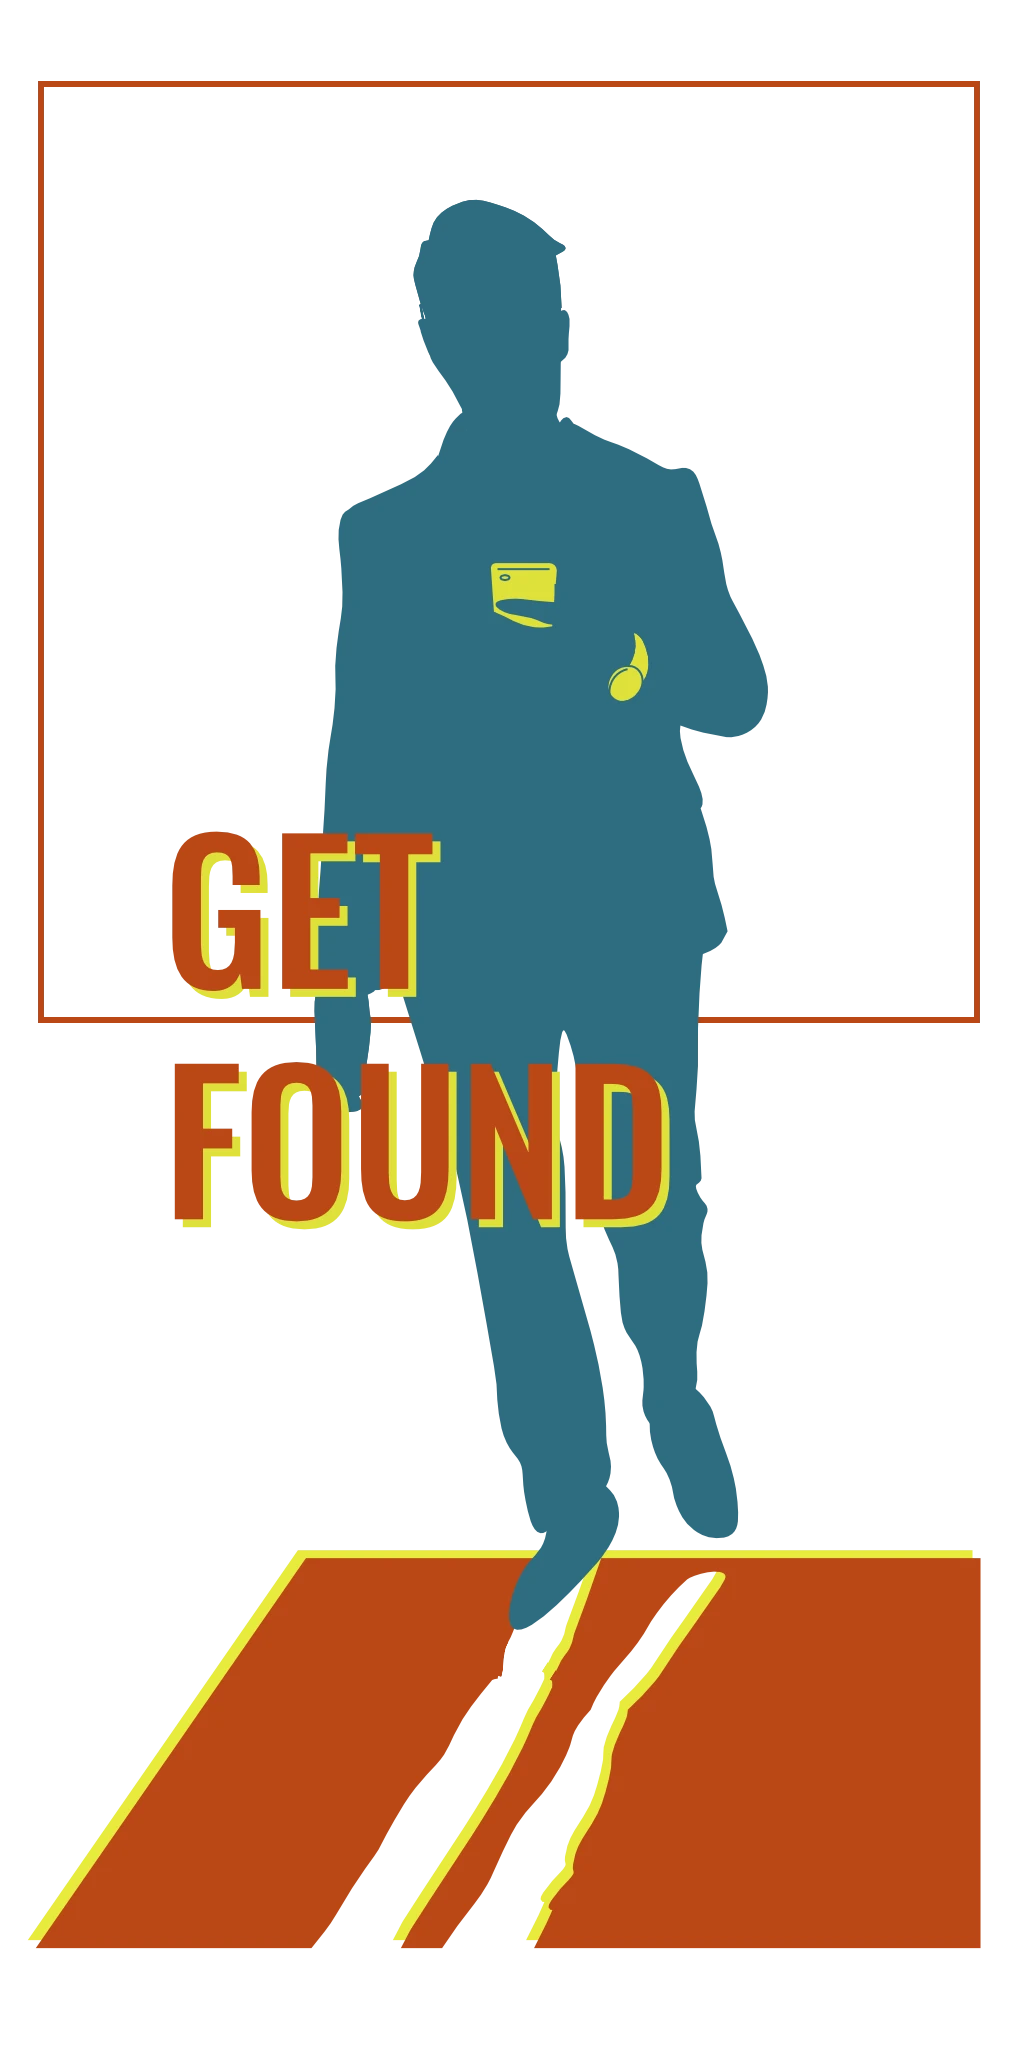 Get Found superimposed over silhouette of a man walking while looking at his cell phone.